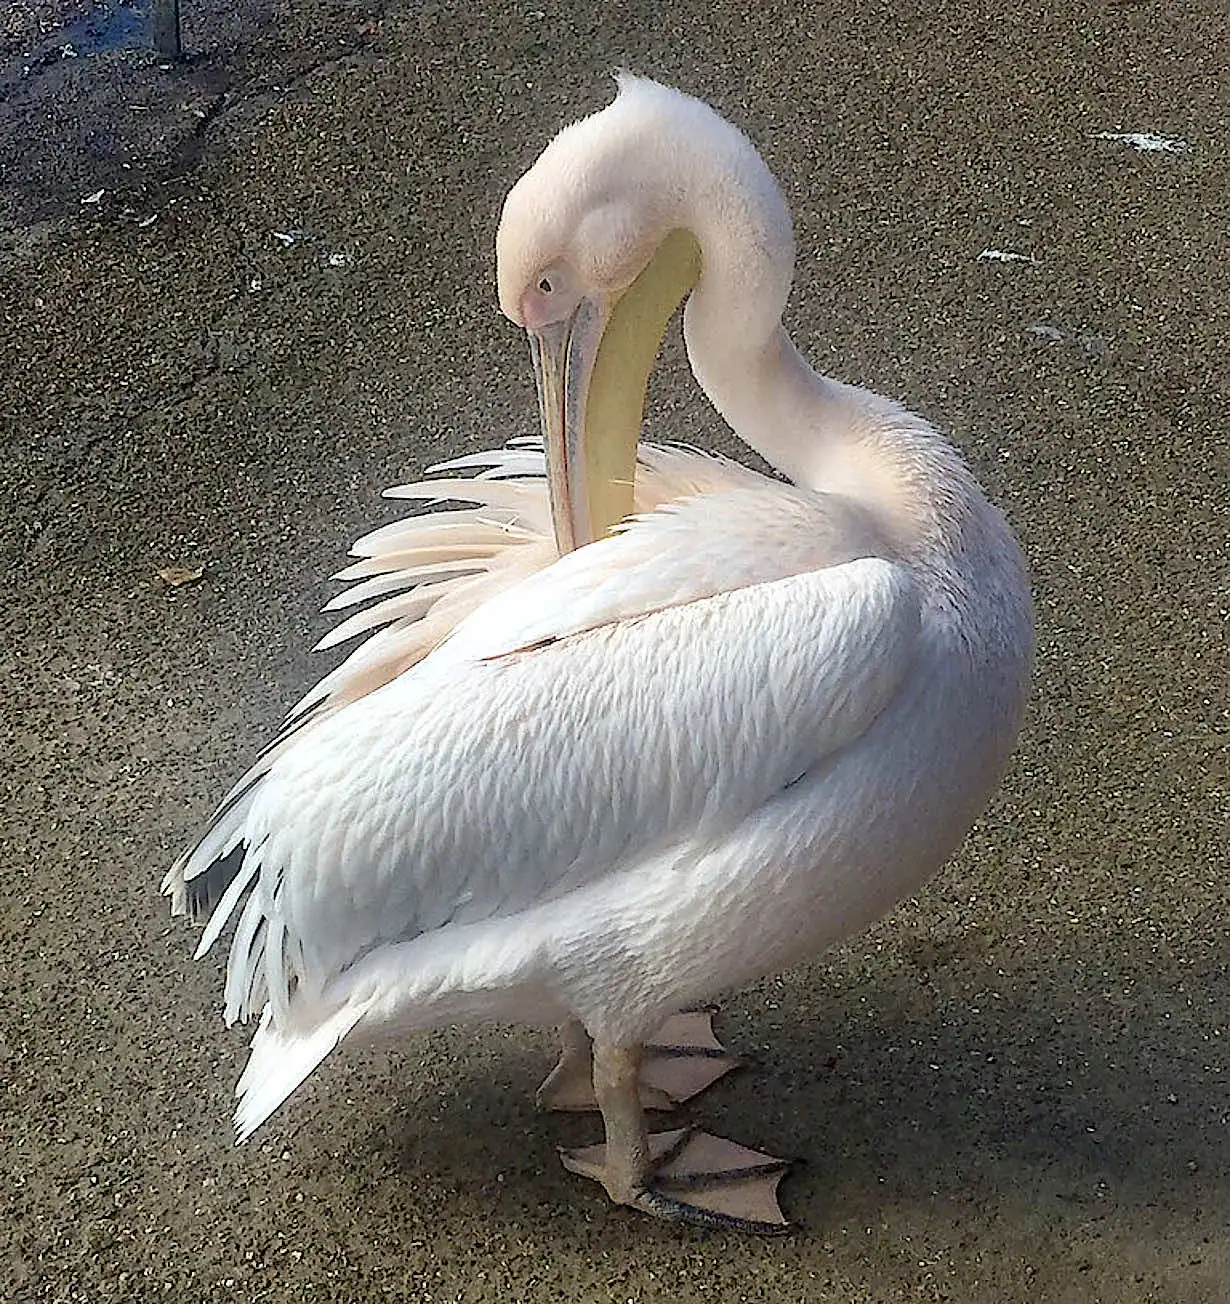 A pelican in St. James’s Park